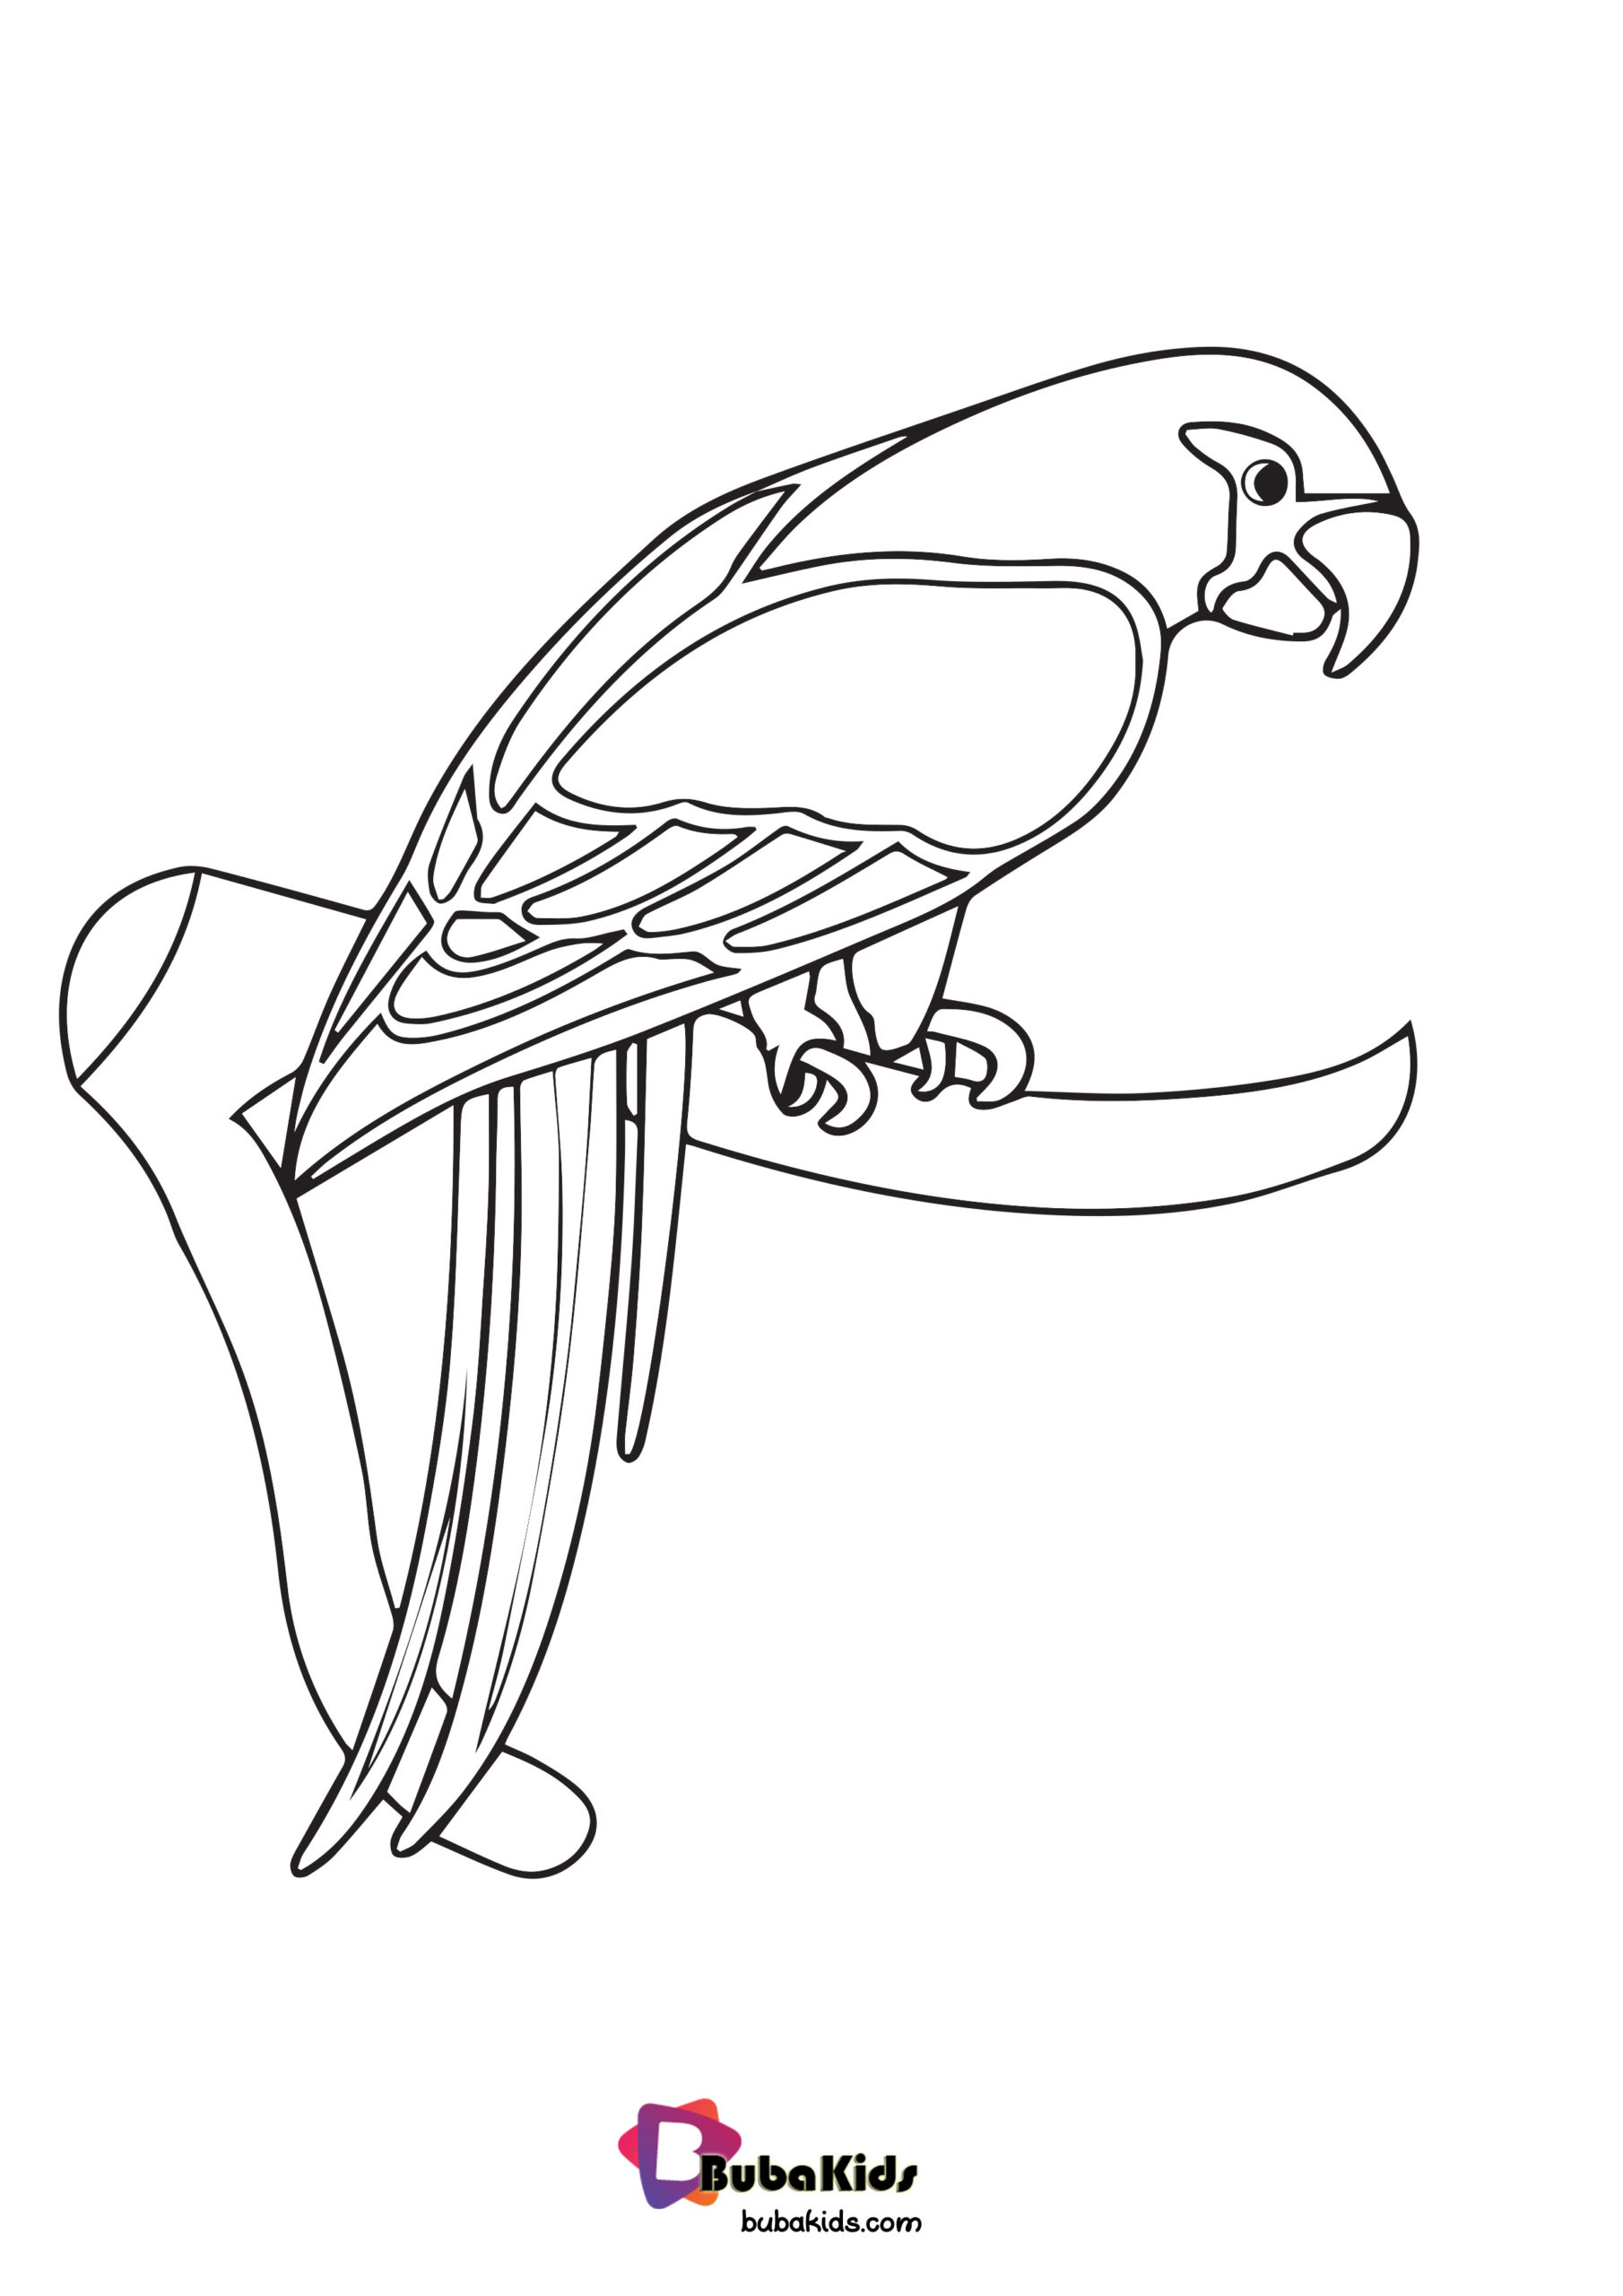 Parrot Animal Coloring Page For Kids Wallpaper